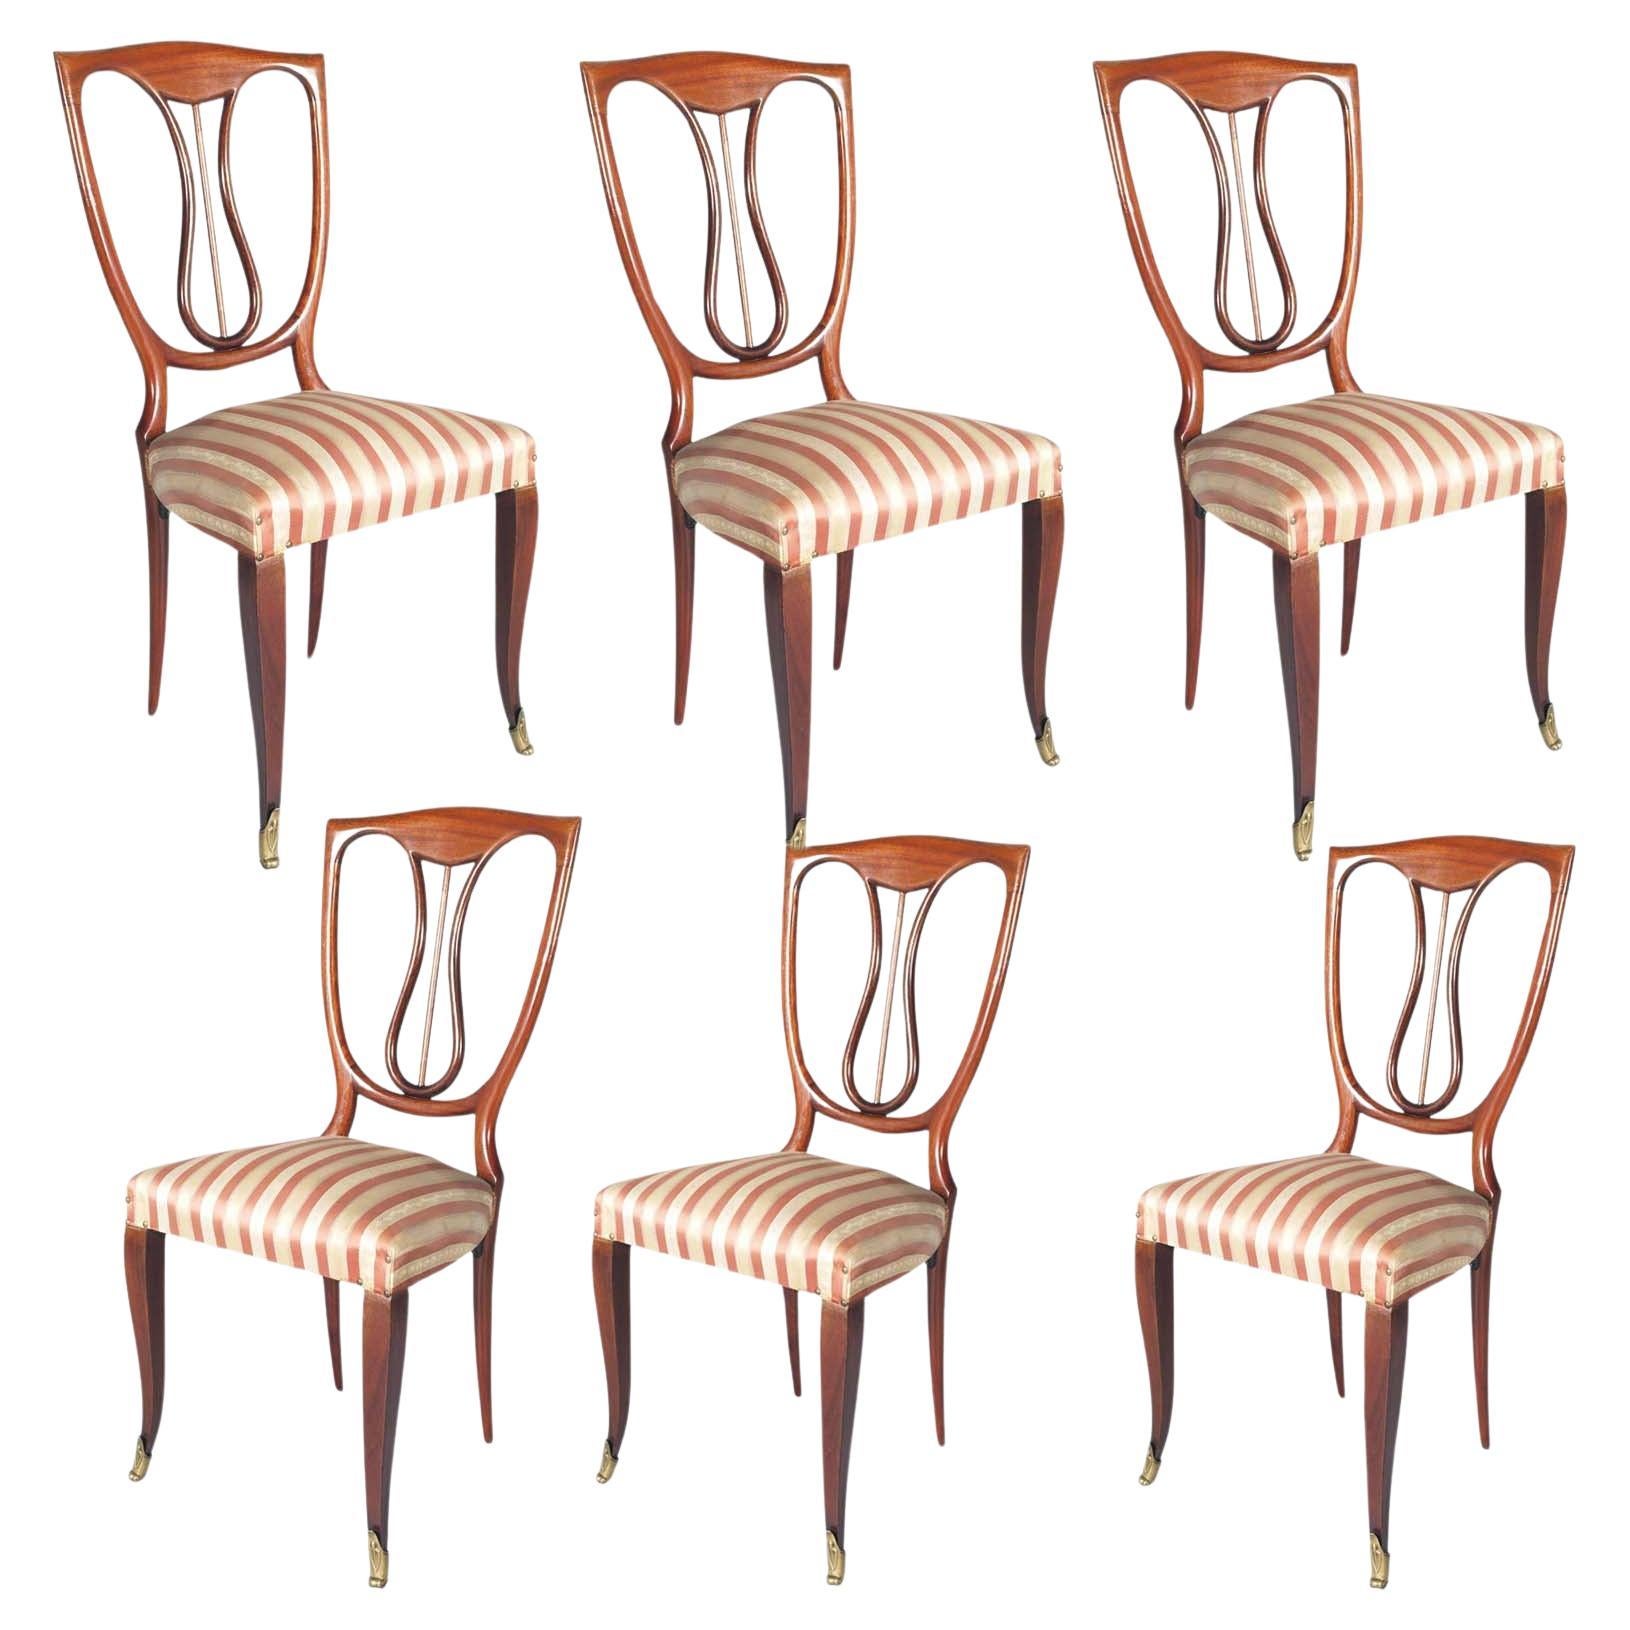 Six 1940s Chairs in Mahogany Melchiorre Bega attributed, by Galleria Mobili Arte